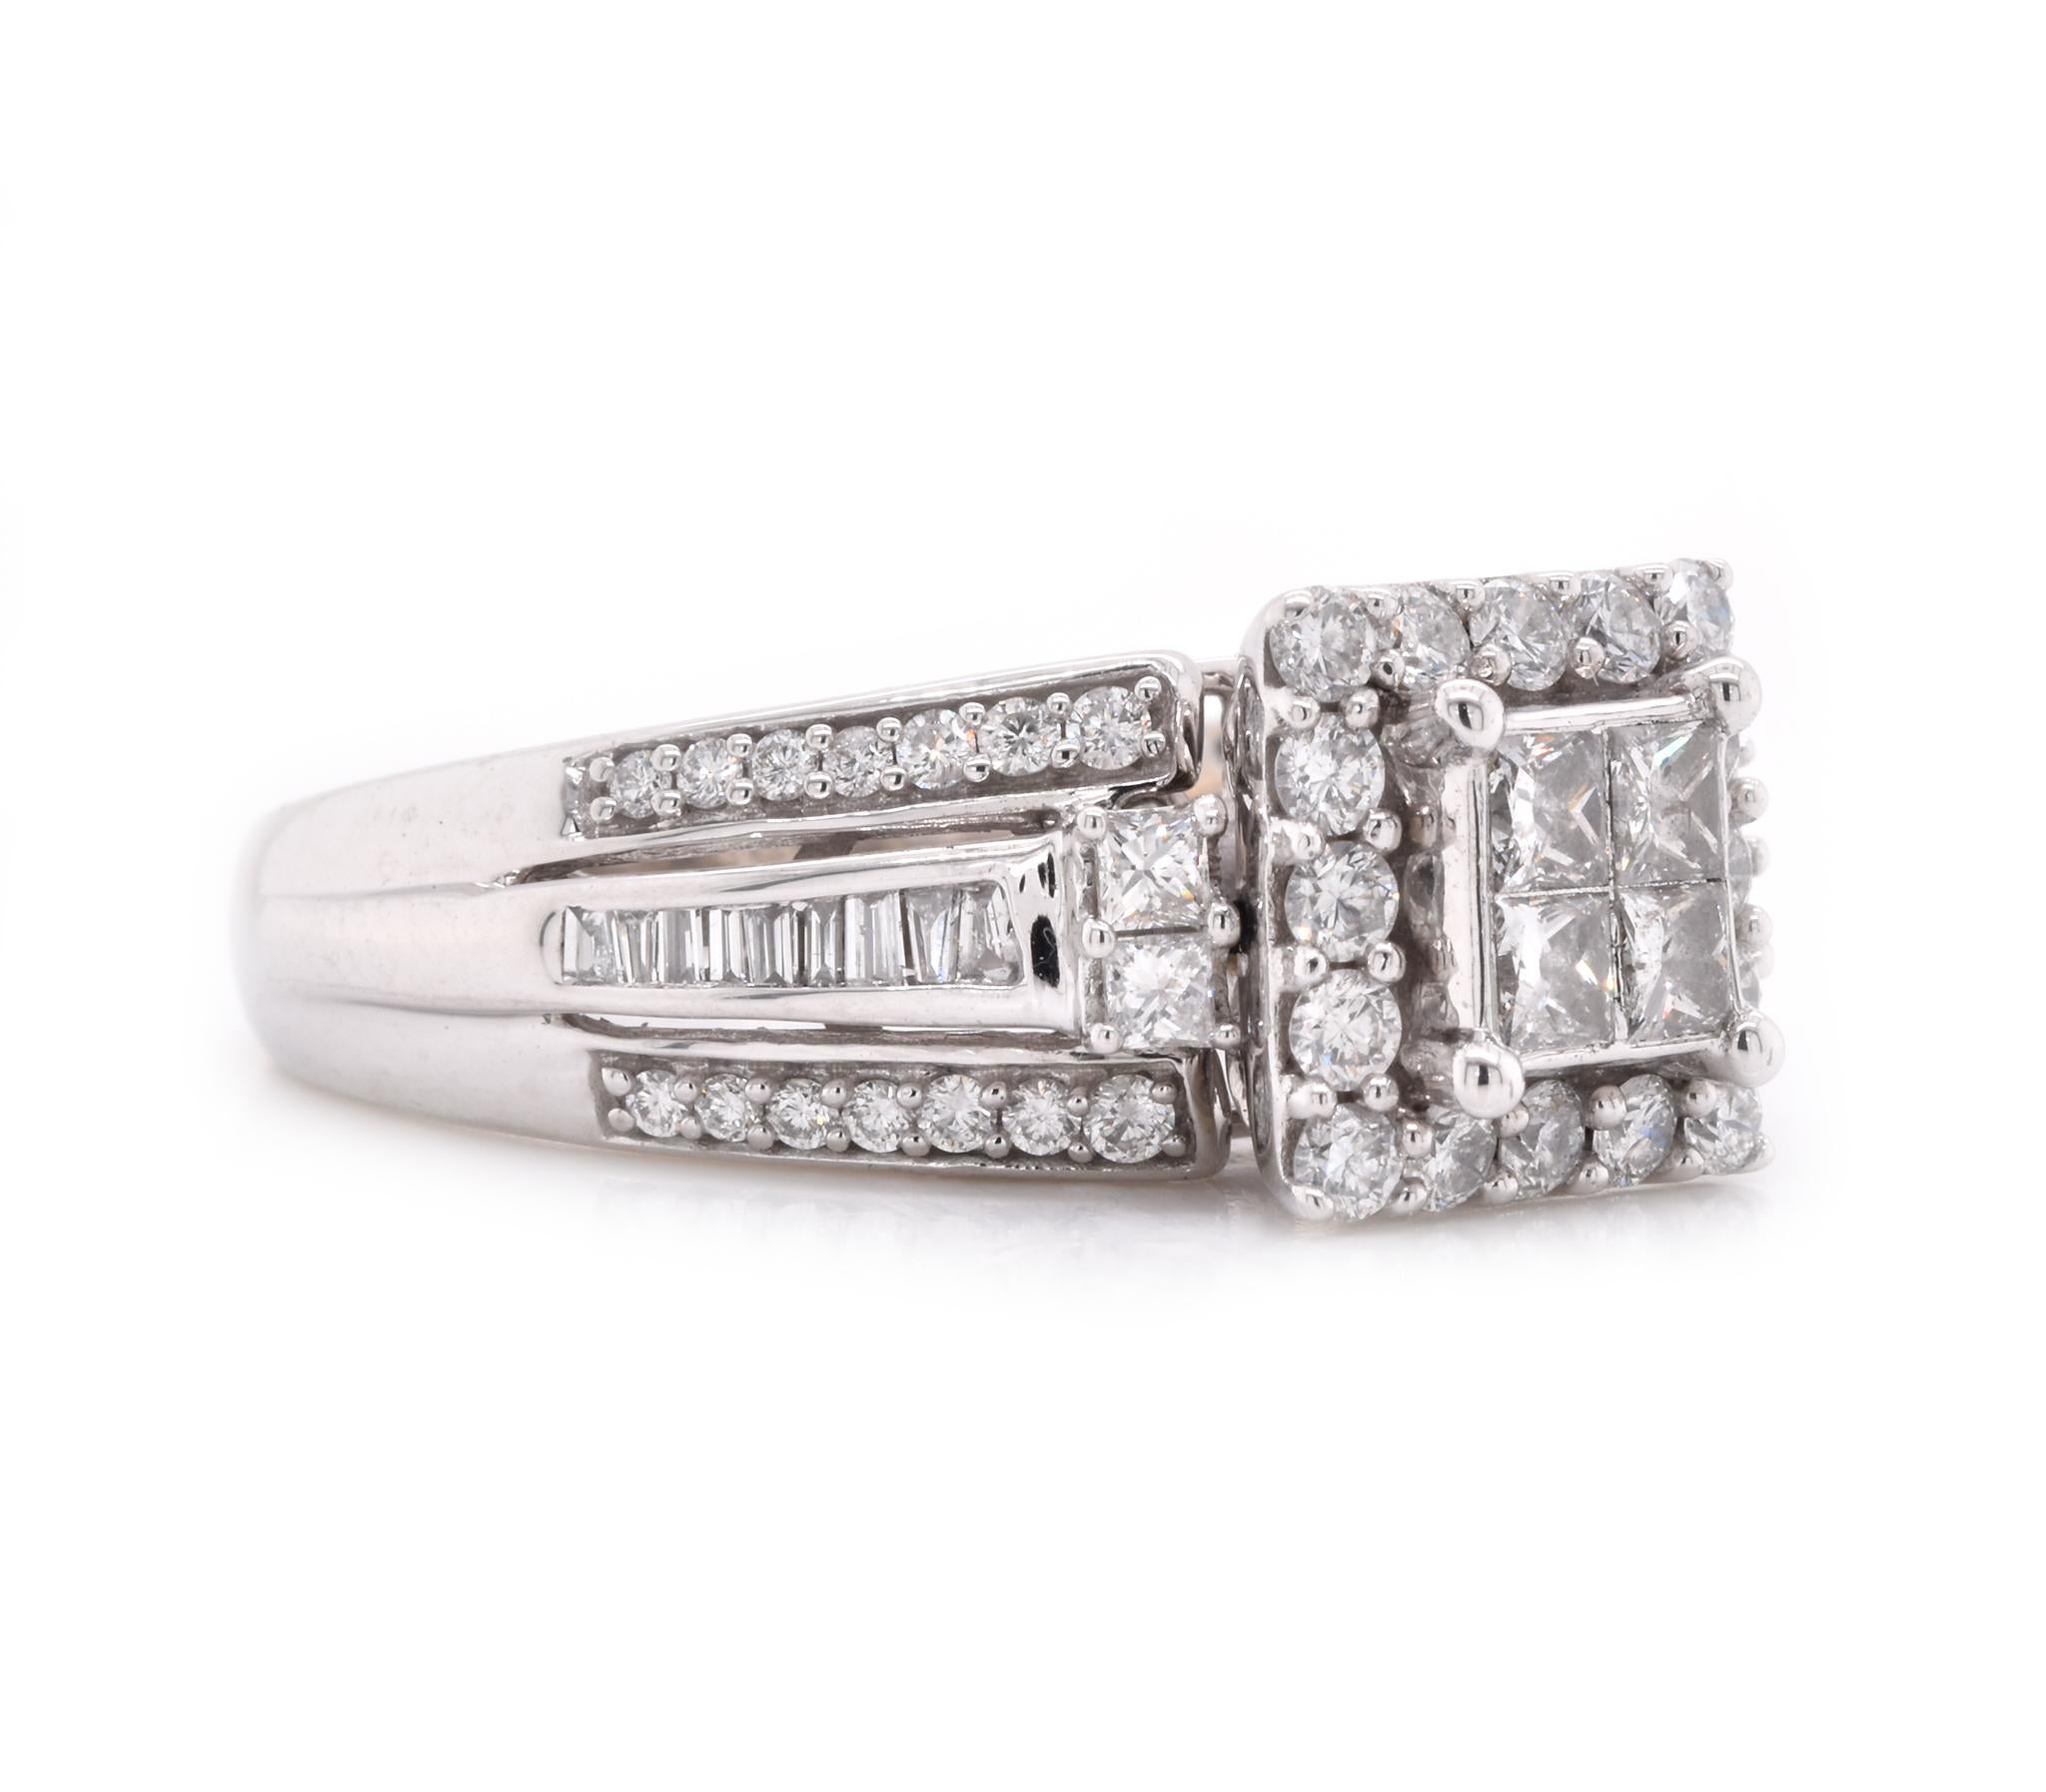 Designer: custom
Material: 10K white gold
Diamond: princess, round and baguette cut = 1.25cttw
Color: H/I
Clarity: SI1
Ring Size: 7.25 (please allow up to 2 additional business days for sizing requests)
Dimensions: ring top measures 9.2mm